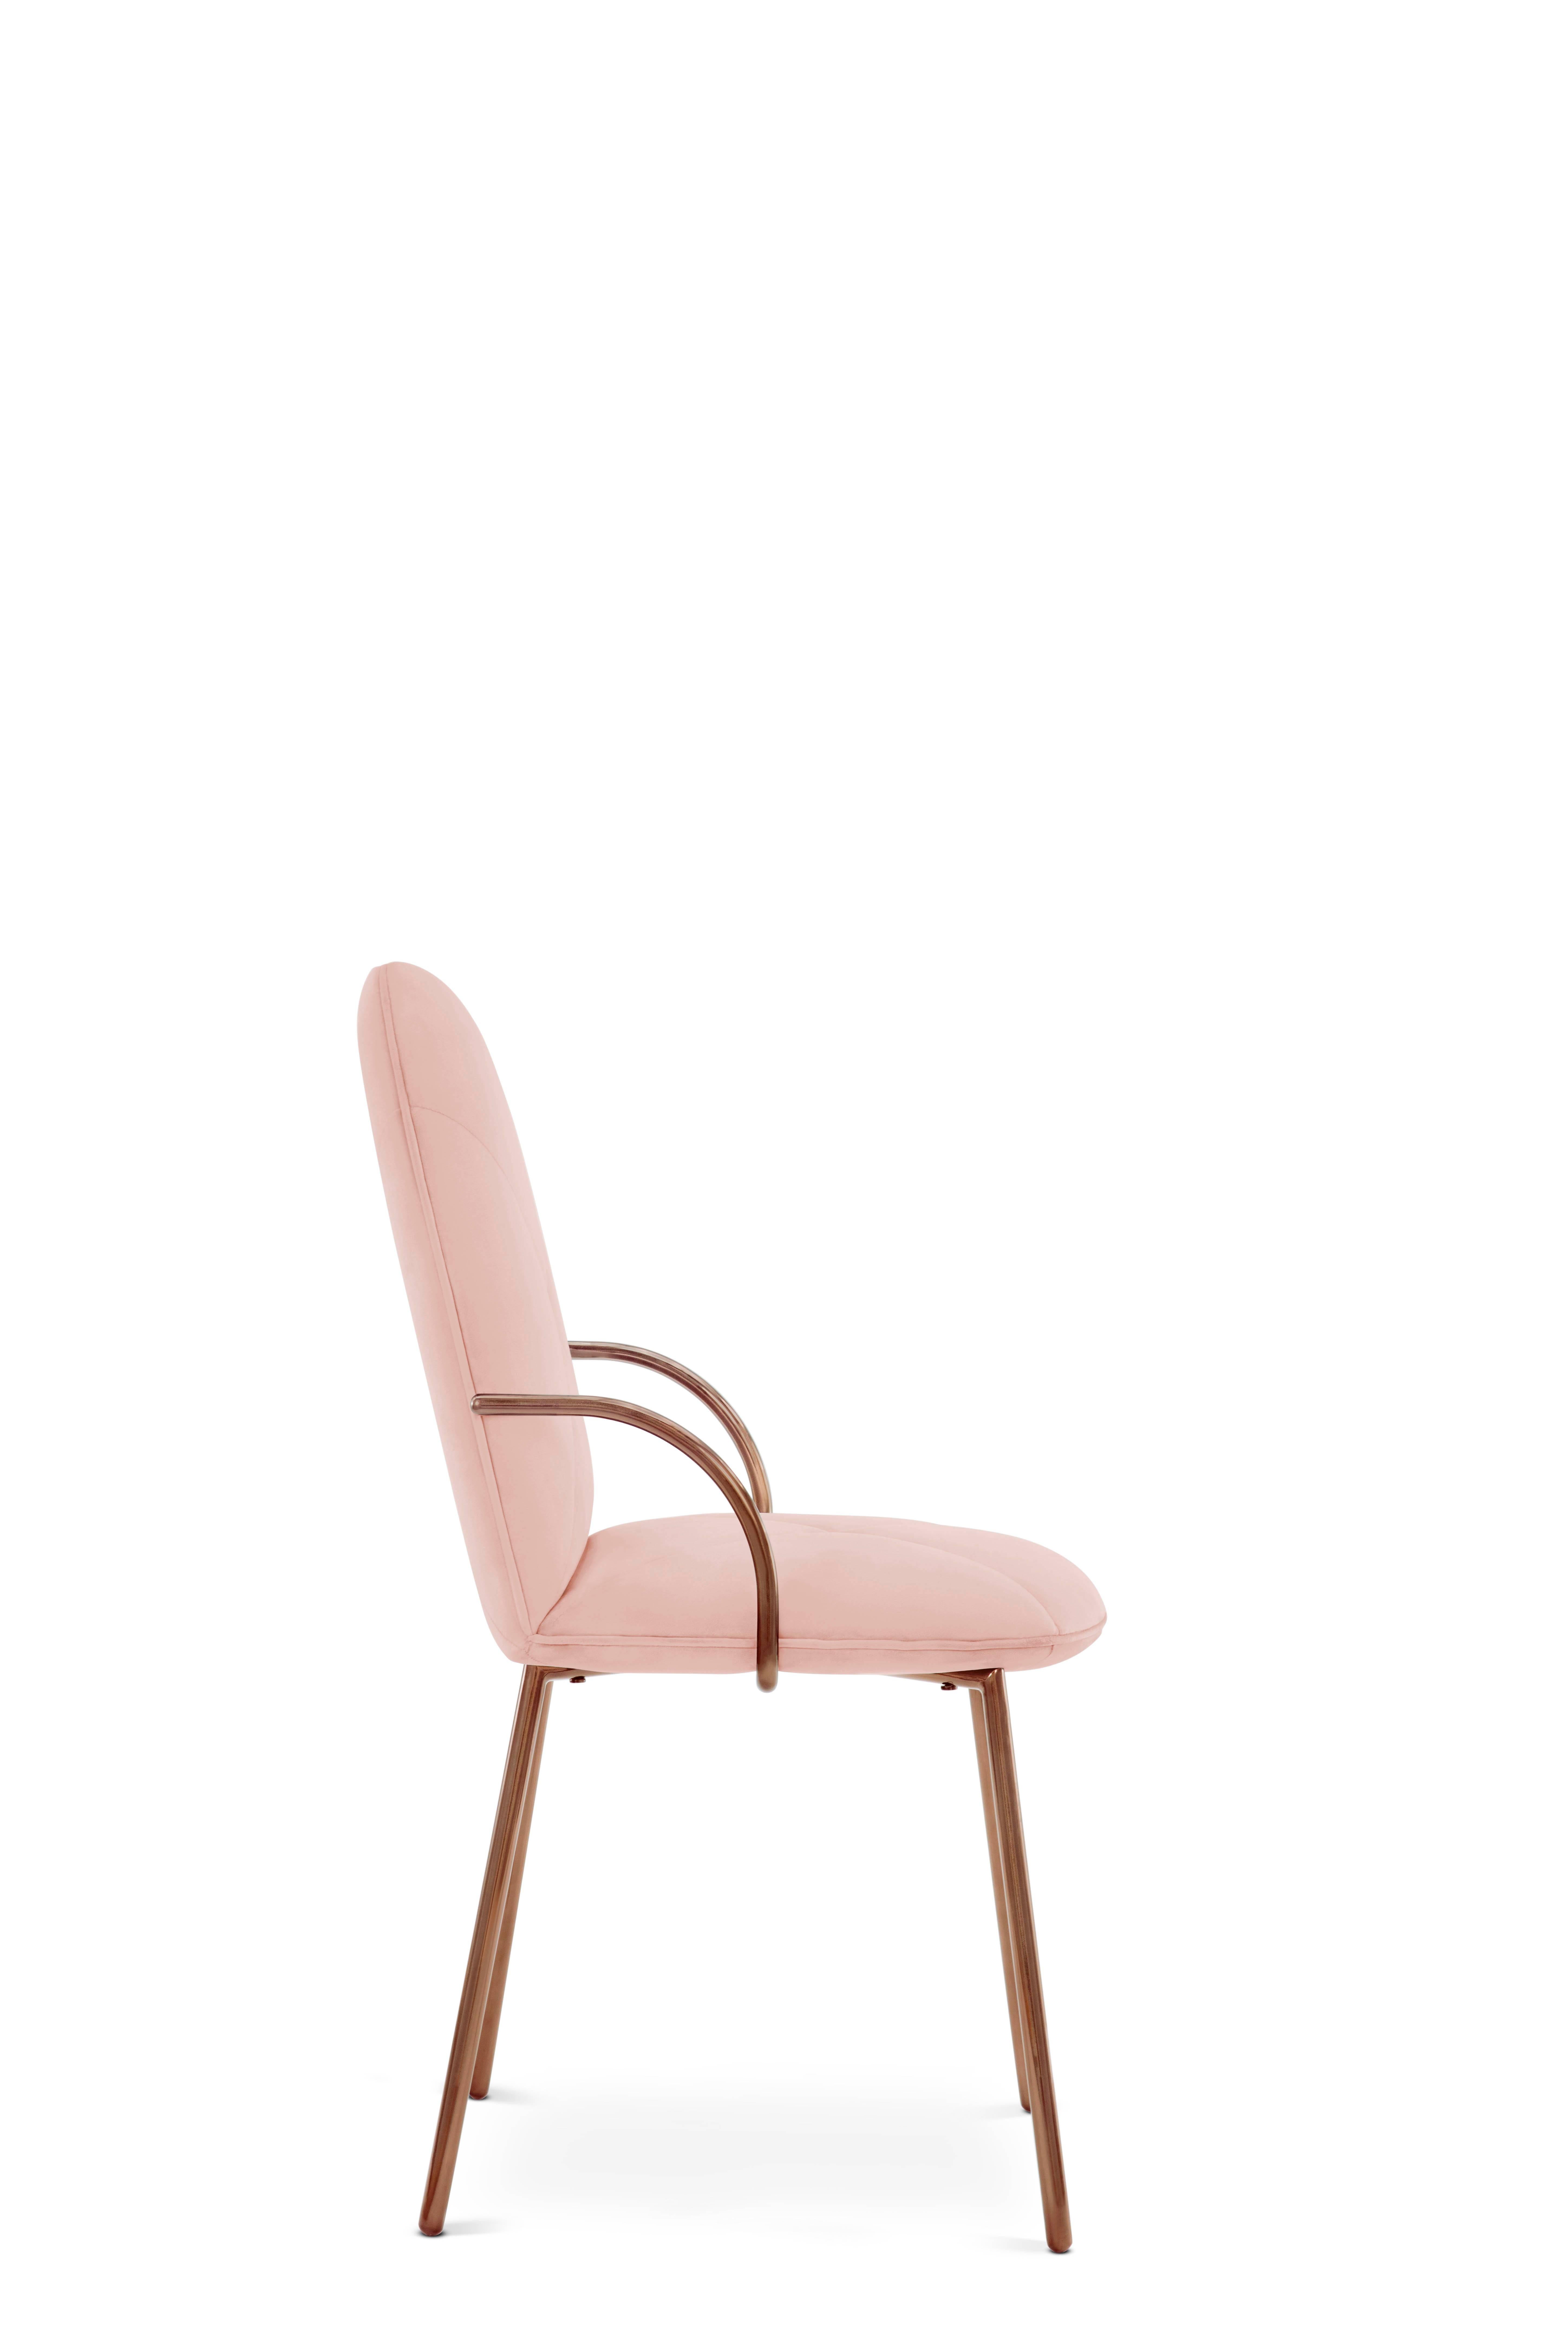 Contemporary Orion Chair Blush Rose by Nika Zupanc for Scarlet Splendour For Sale